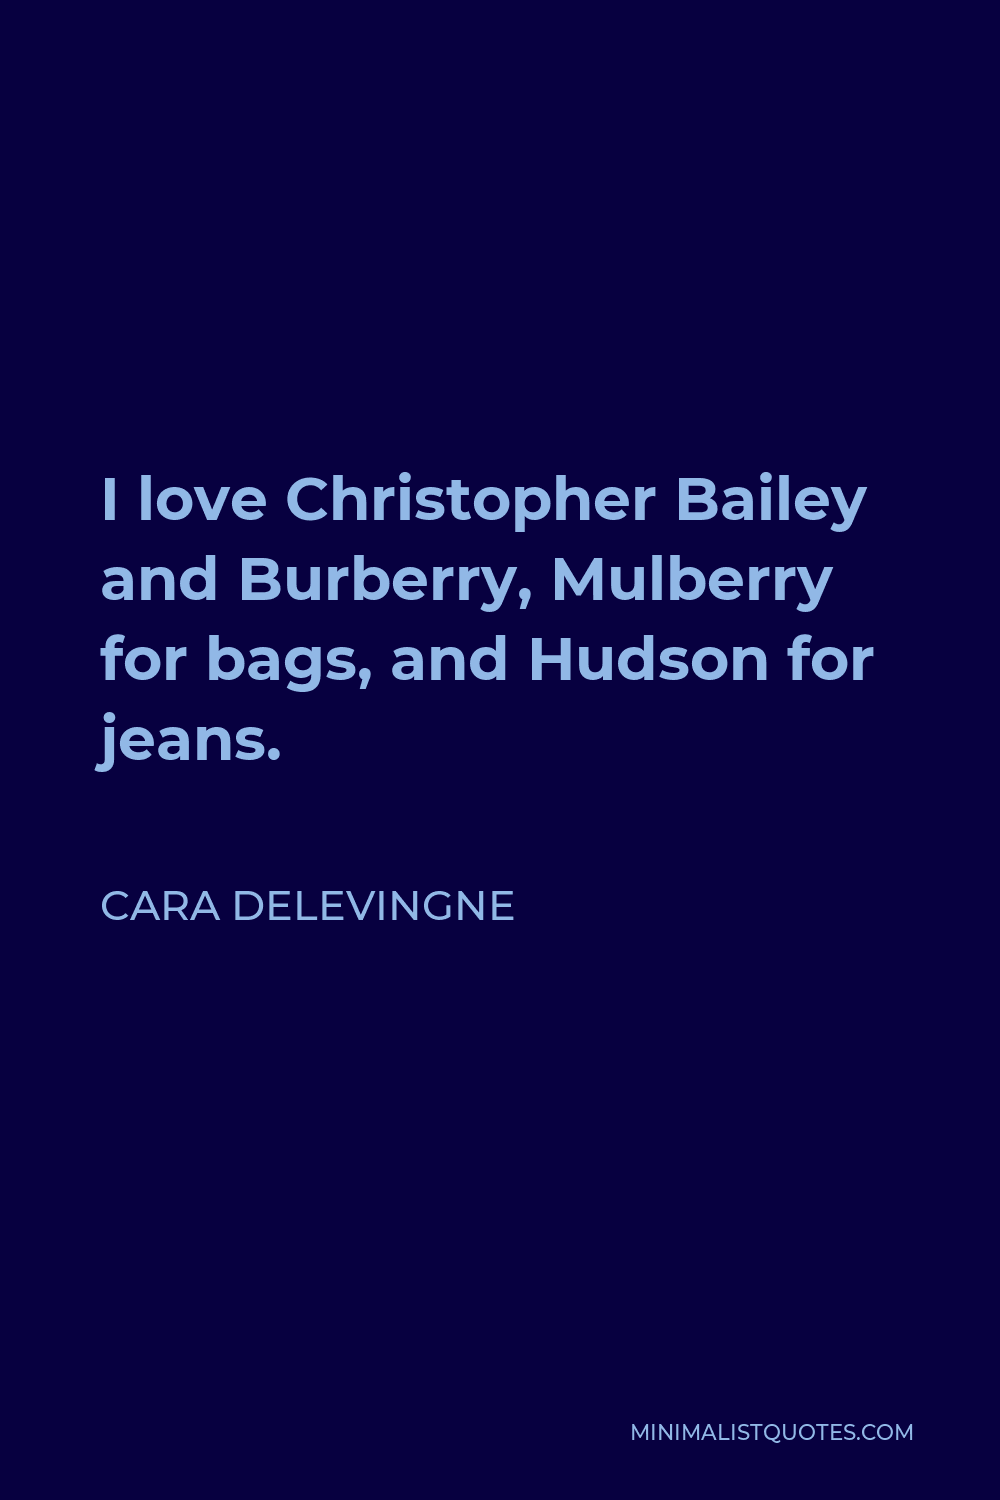 Cara Delevingne Quote - I love Christopher Bailey and Burberry, Mulberry for bags, and Hudson for jeans.